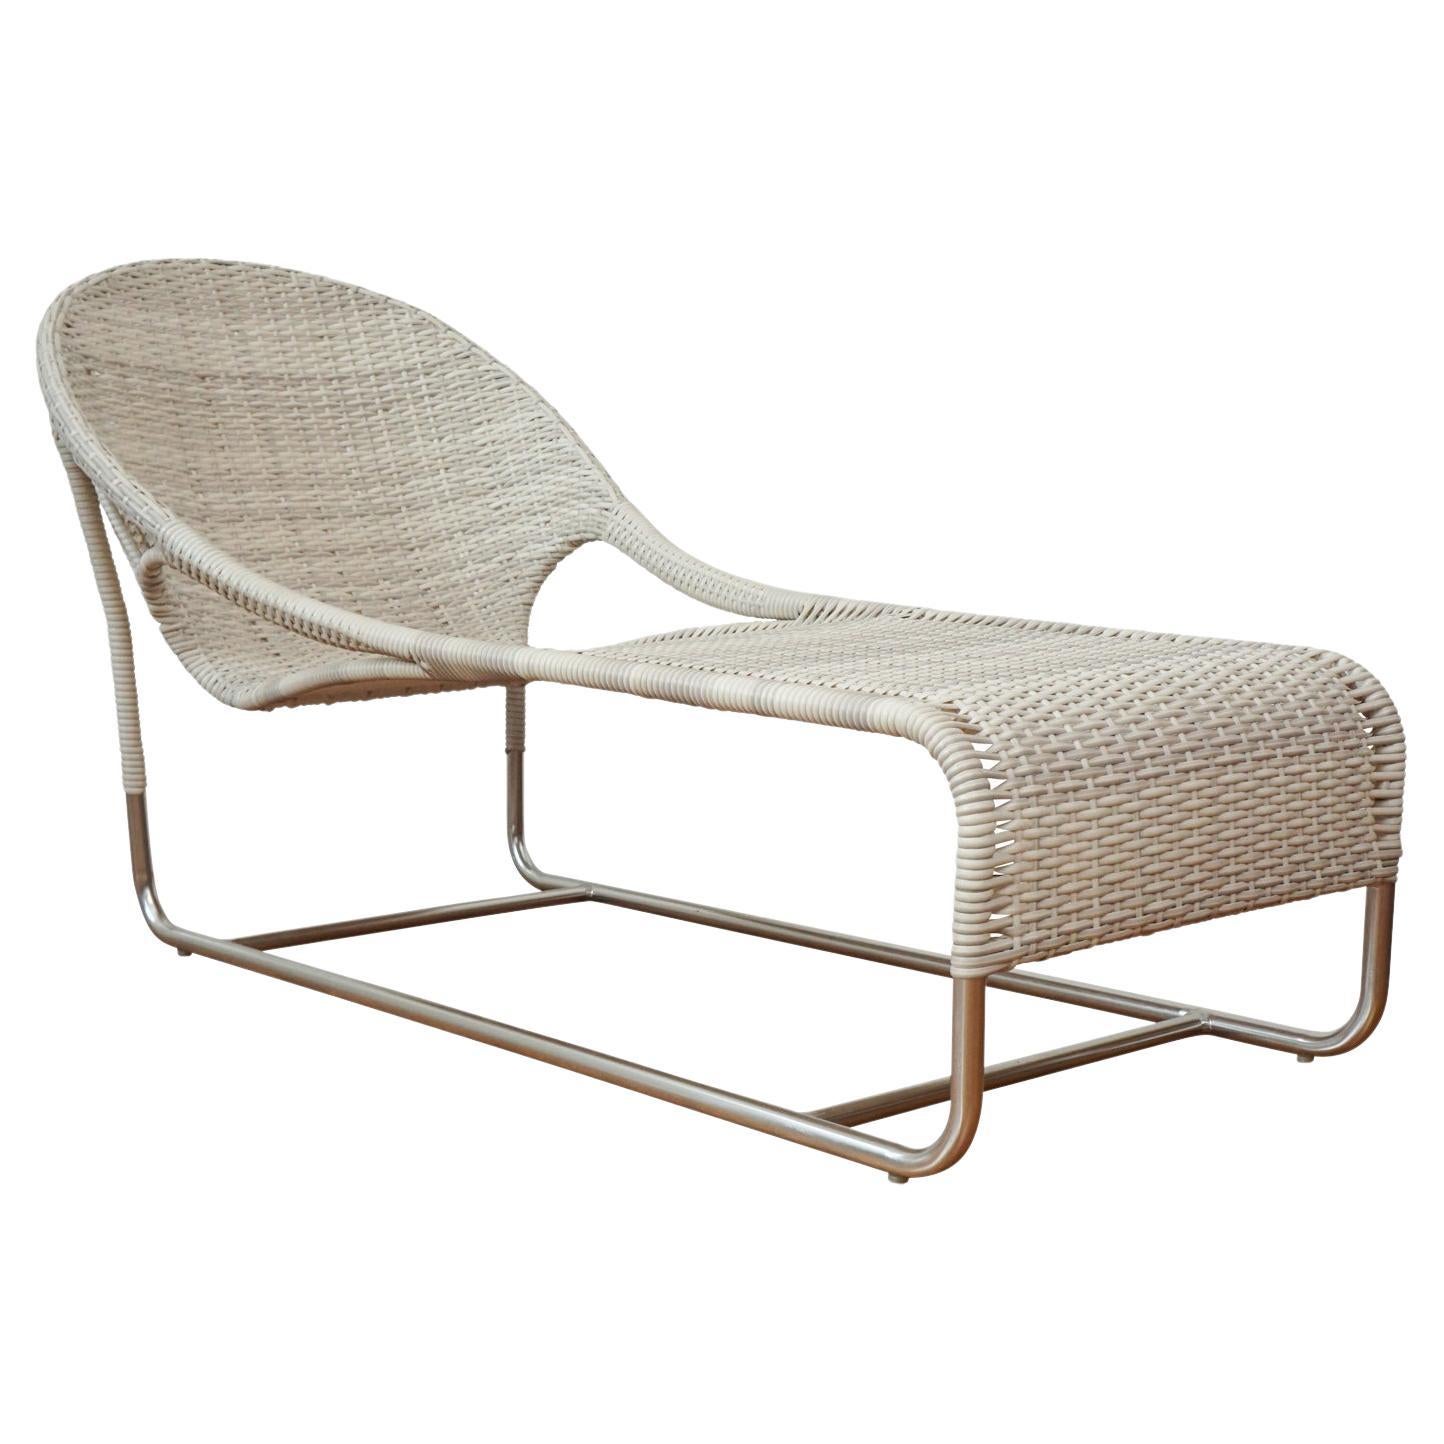 Woven chaise with hooped back and open sides updated for the outdoors. Available in natural or white-colored polypropylene on a brushed aluminum frame.

Measurements:
length: 60